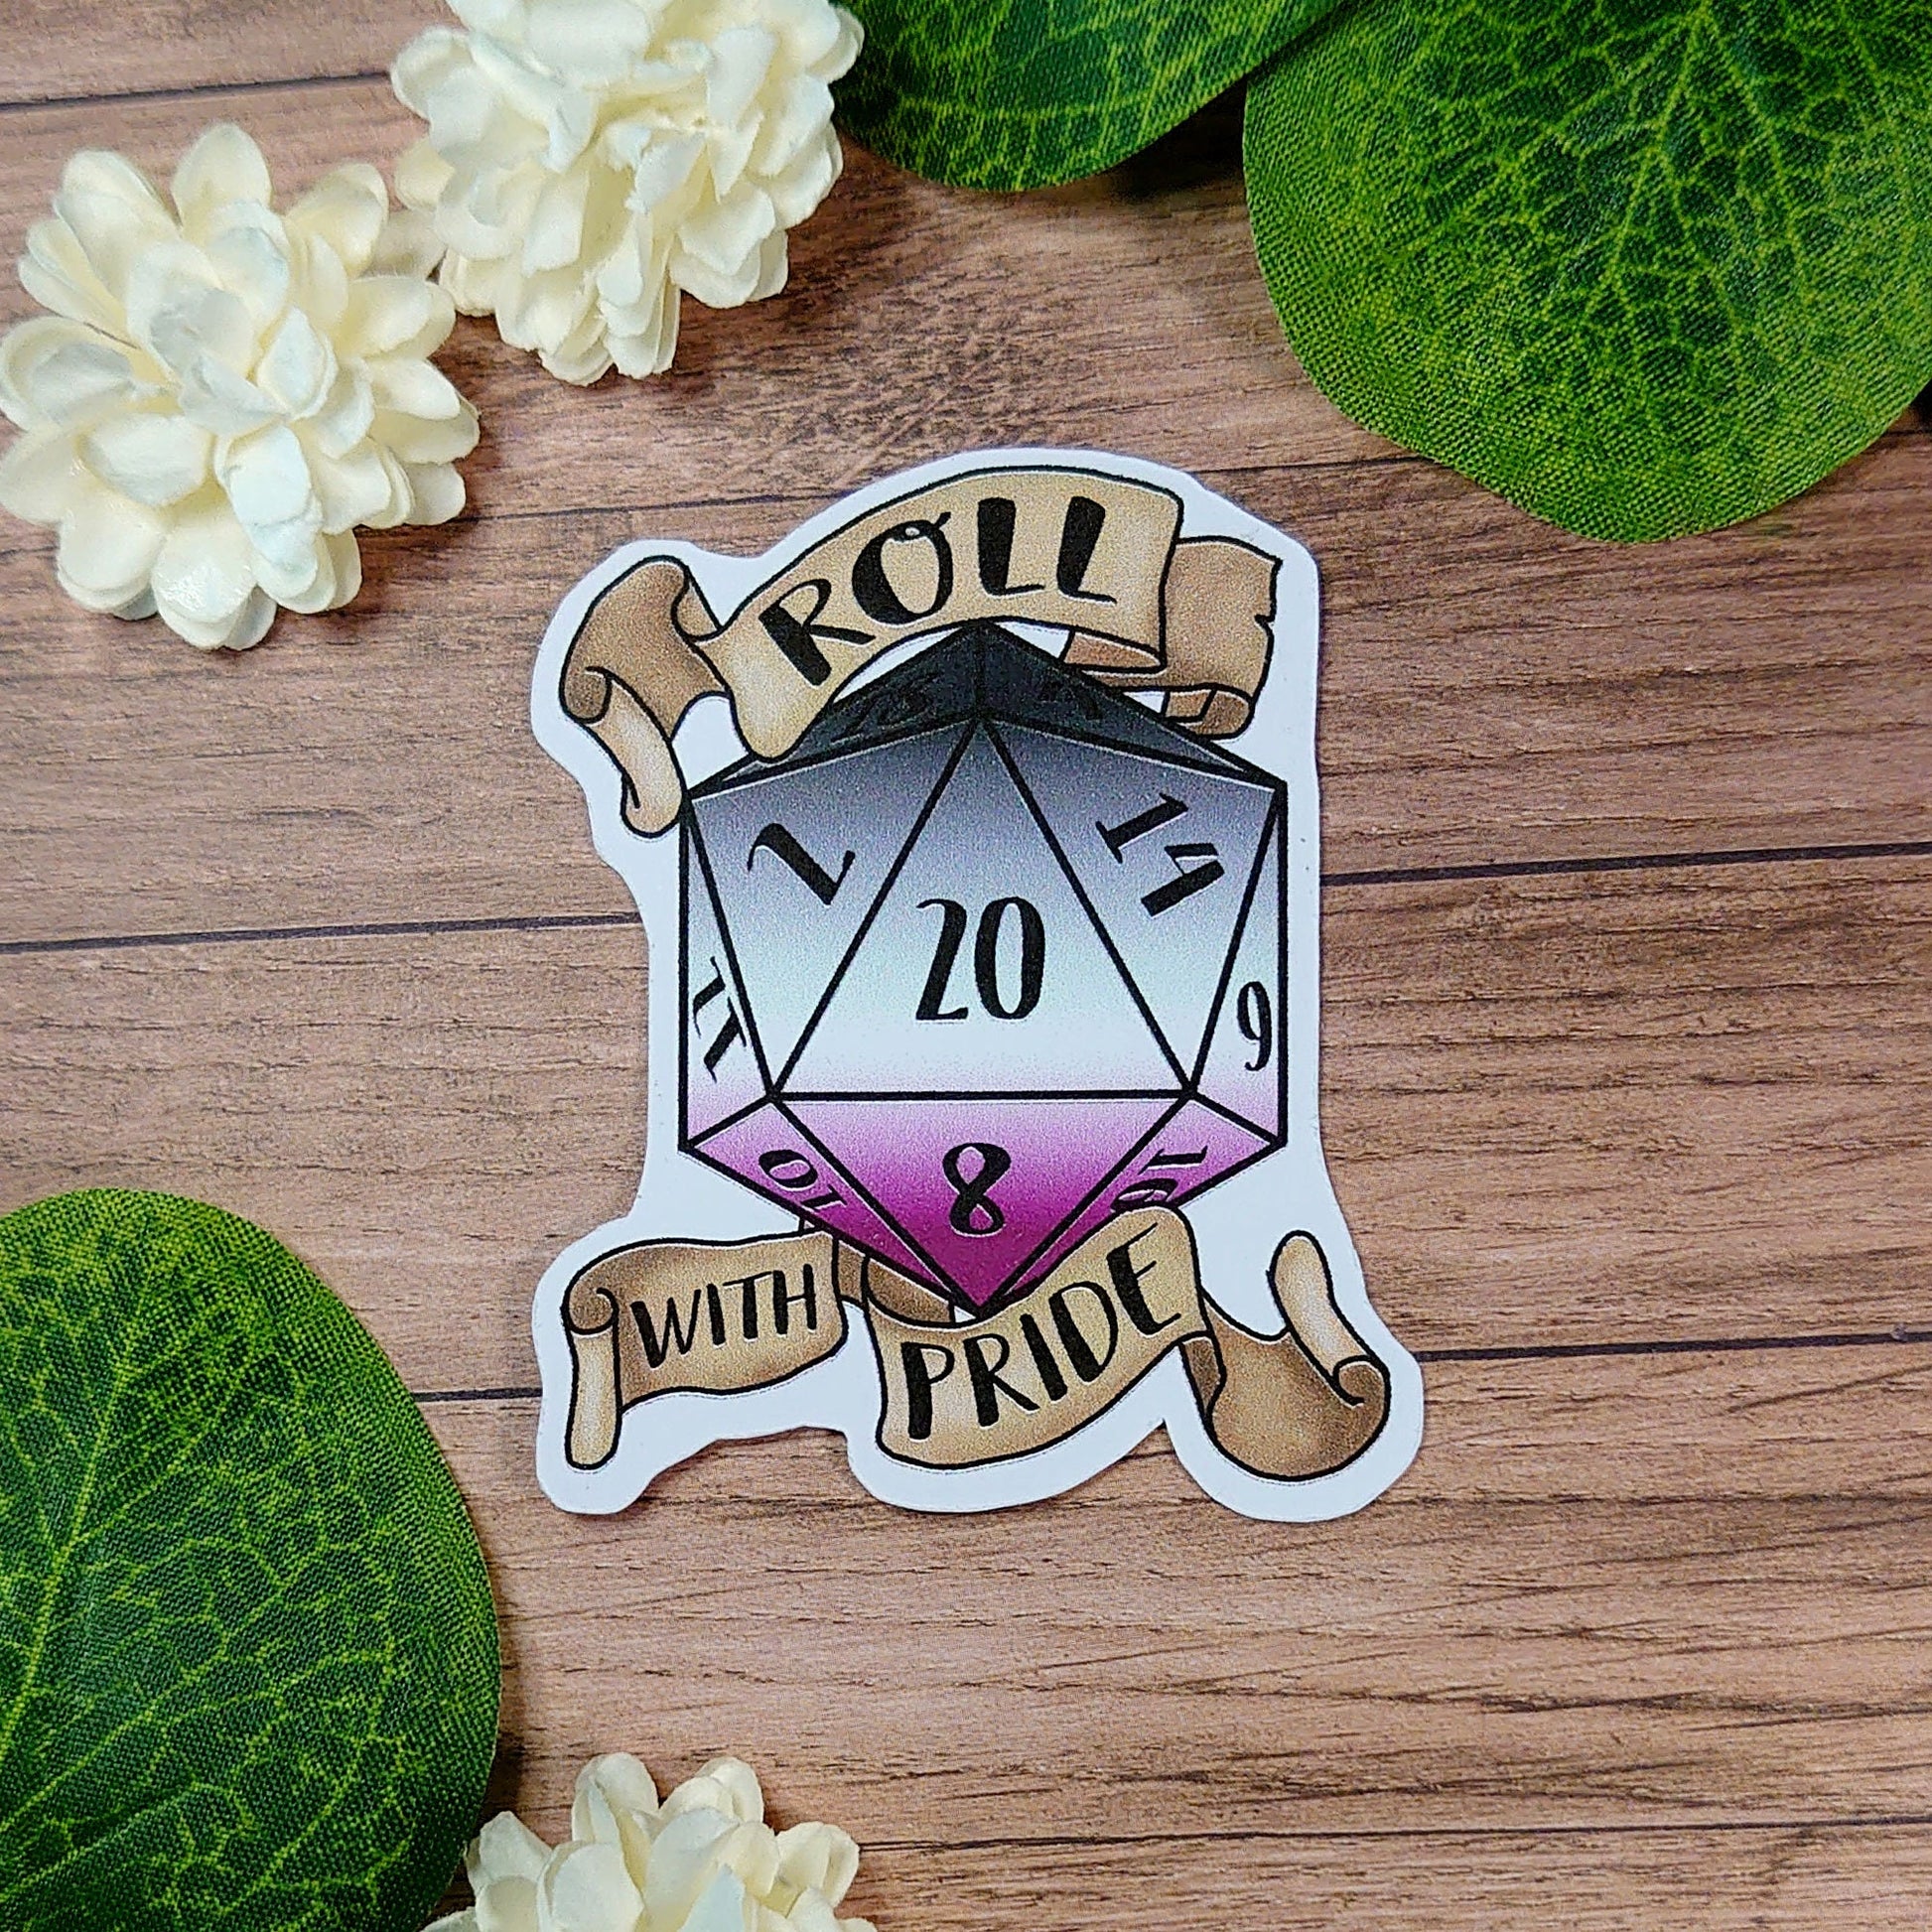 Asexual/Ace - D20 Pride Sticker - Decoration, Roleplaying, Scrapbooking Vinyl Sticker - Different Sizes